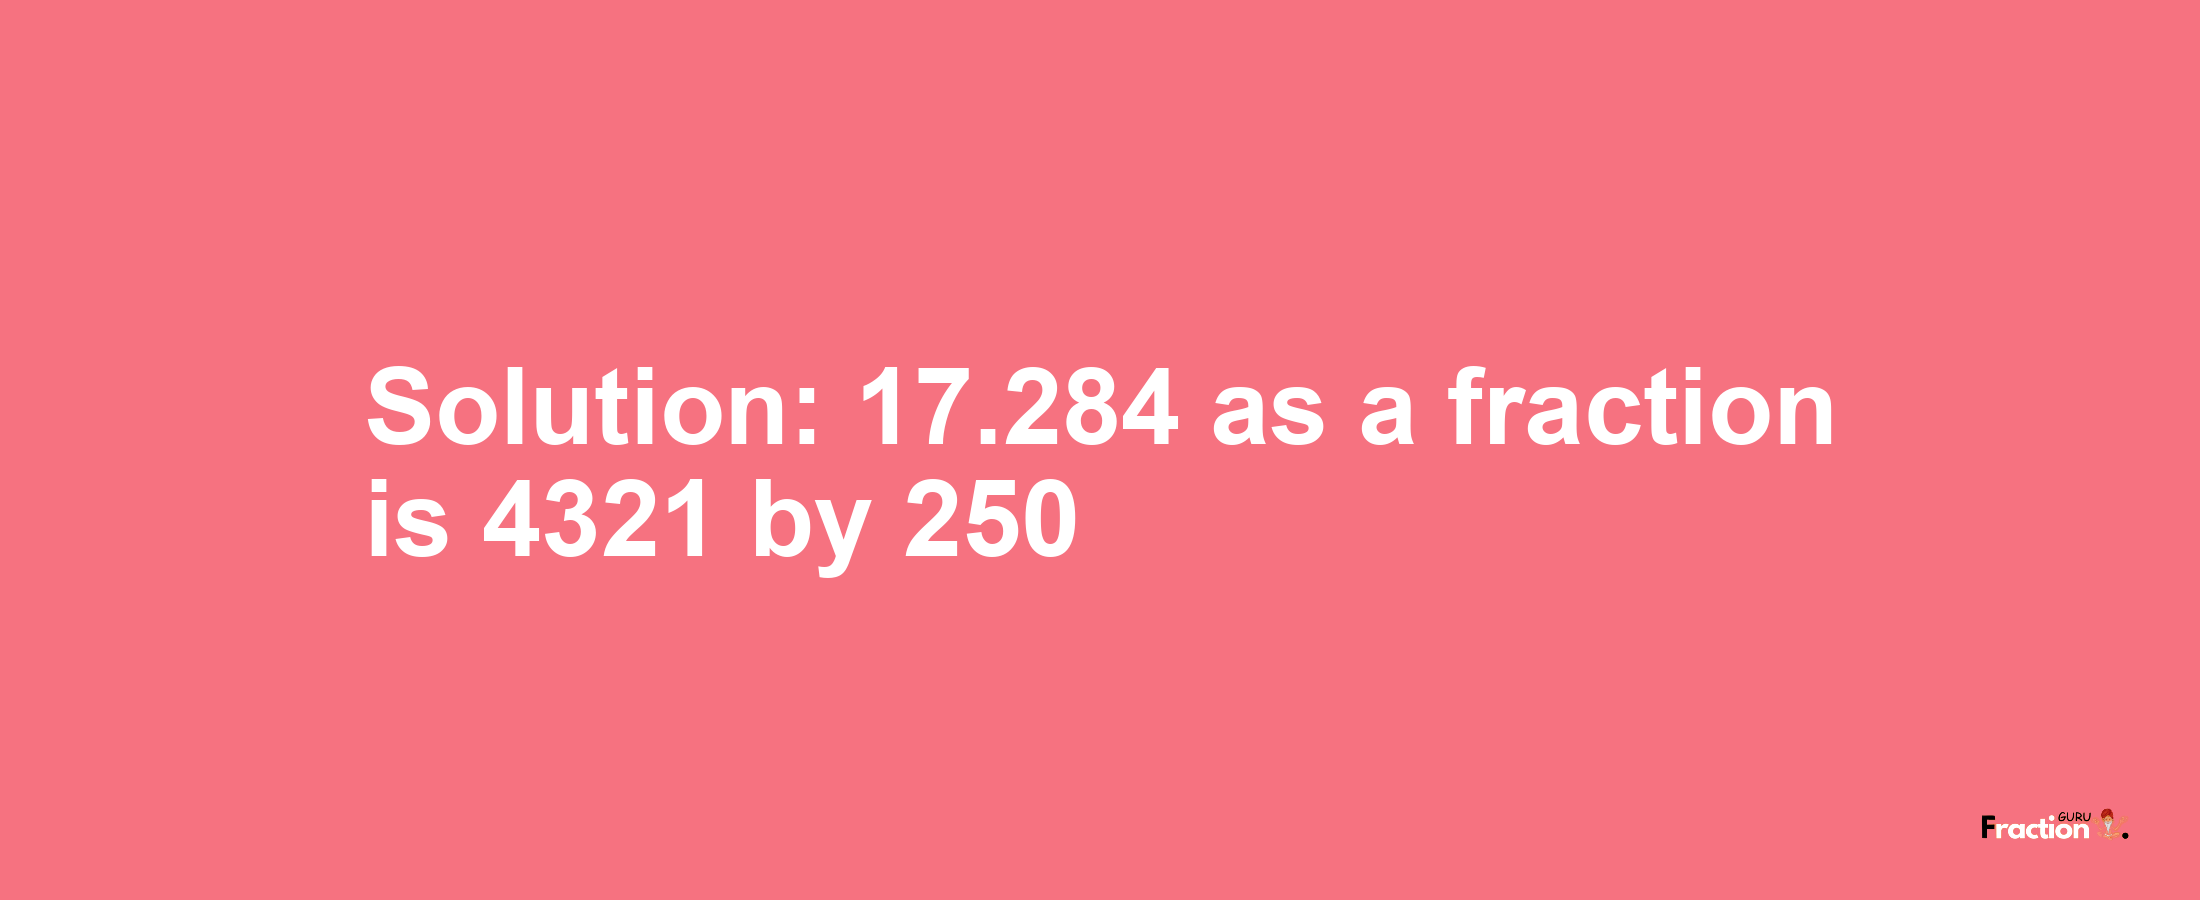 Solution:17.284 as a fraction is 4321/250